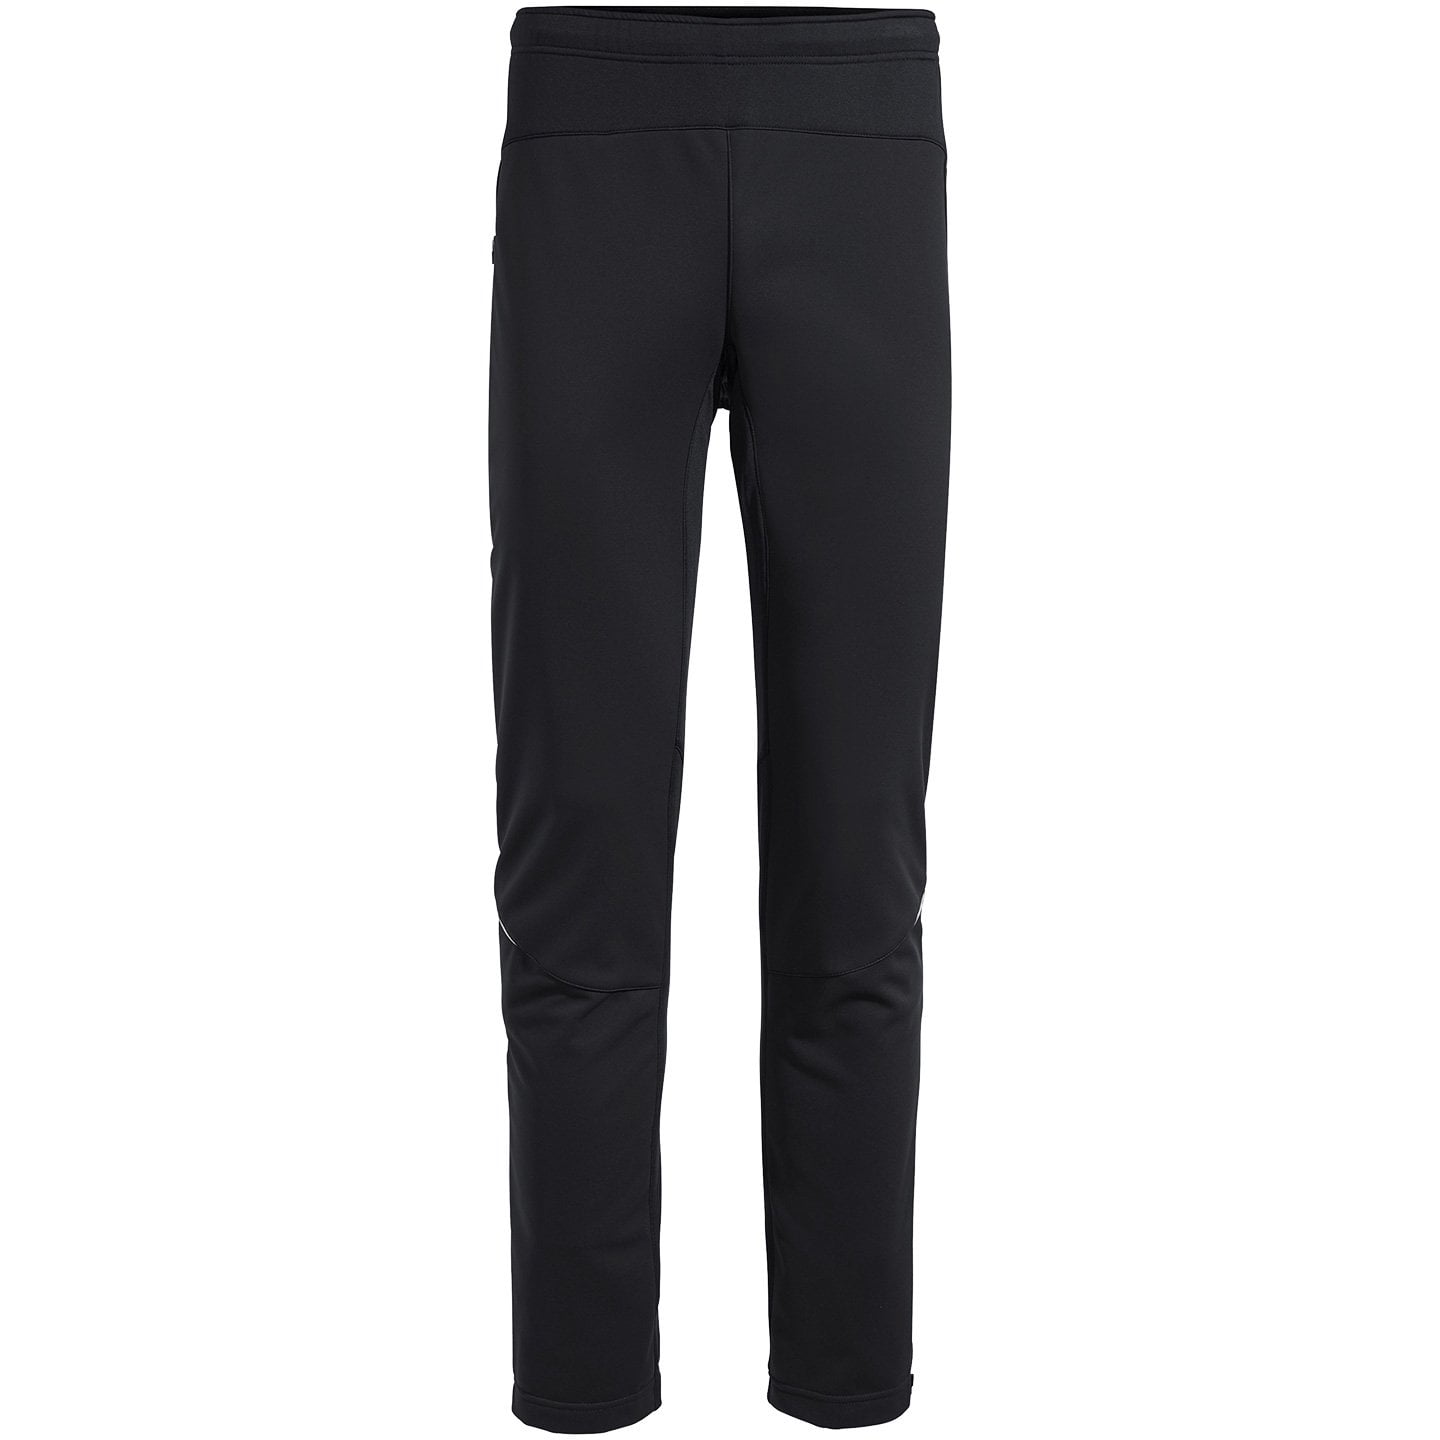 VAUDE Wintry V Bike Trousers w/o Pad Long Bike Pants, for men, size L, Cycle trousers, Cycle gear